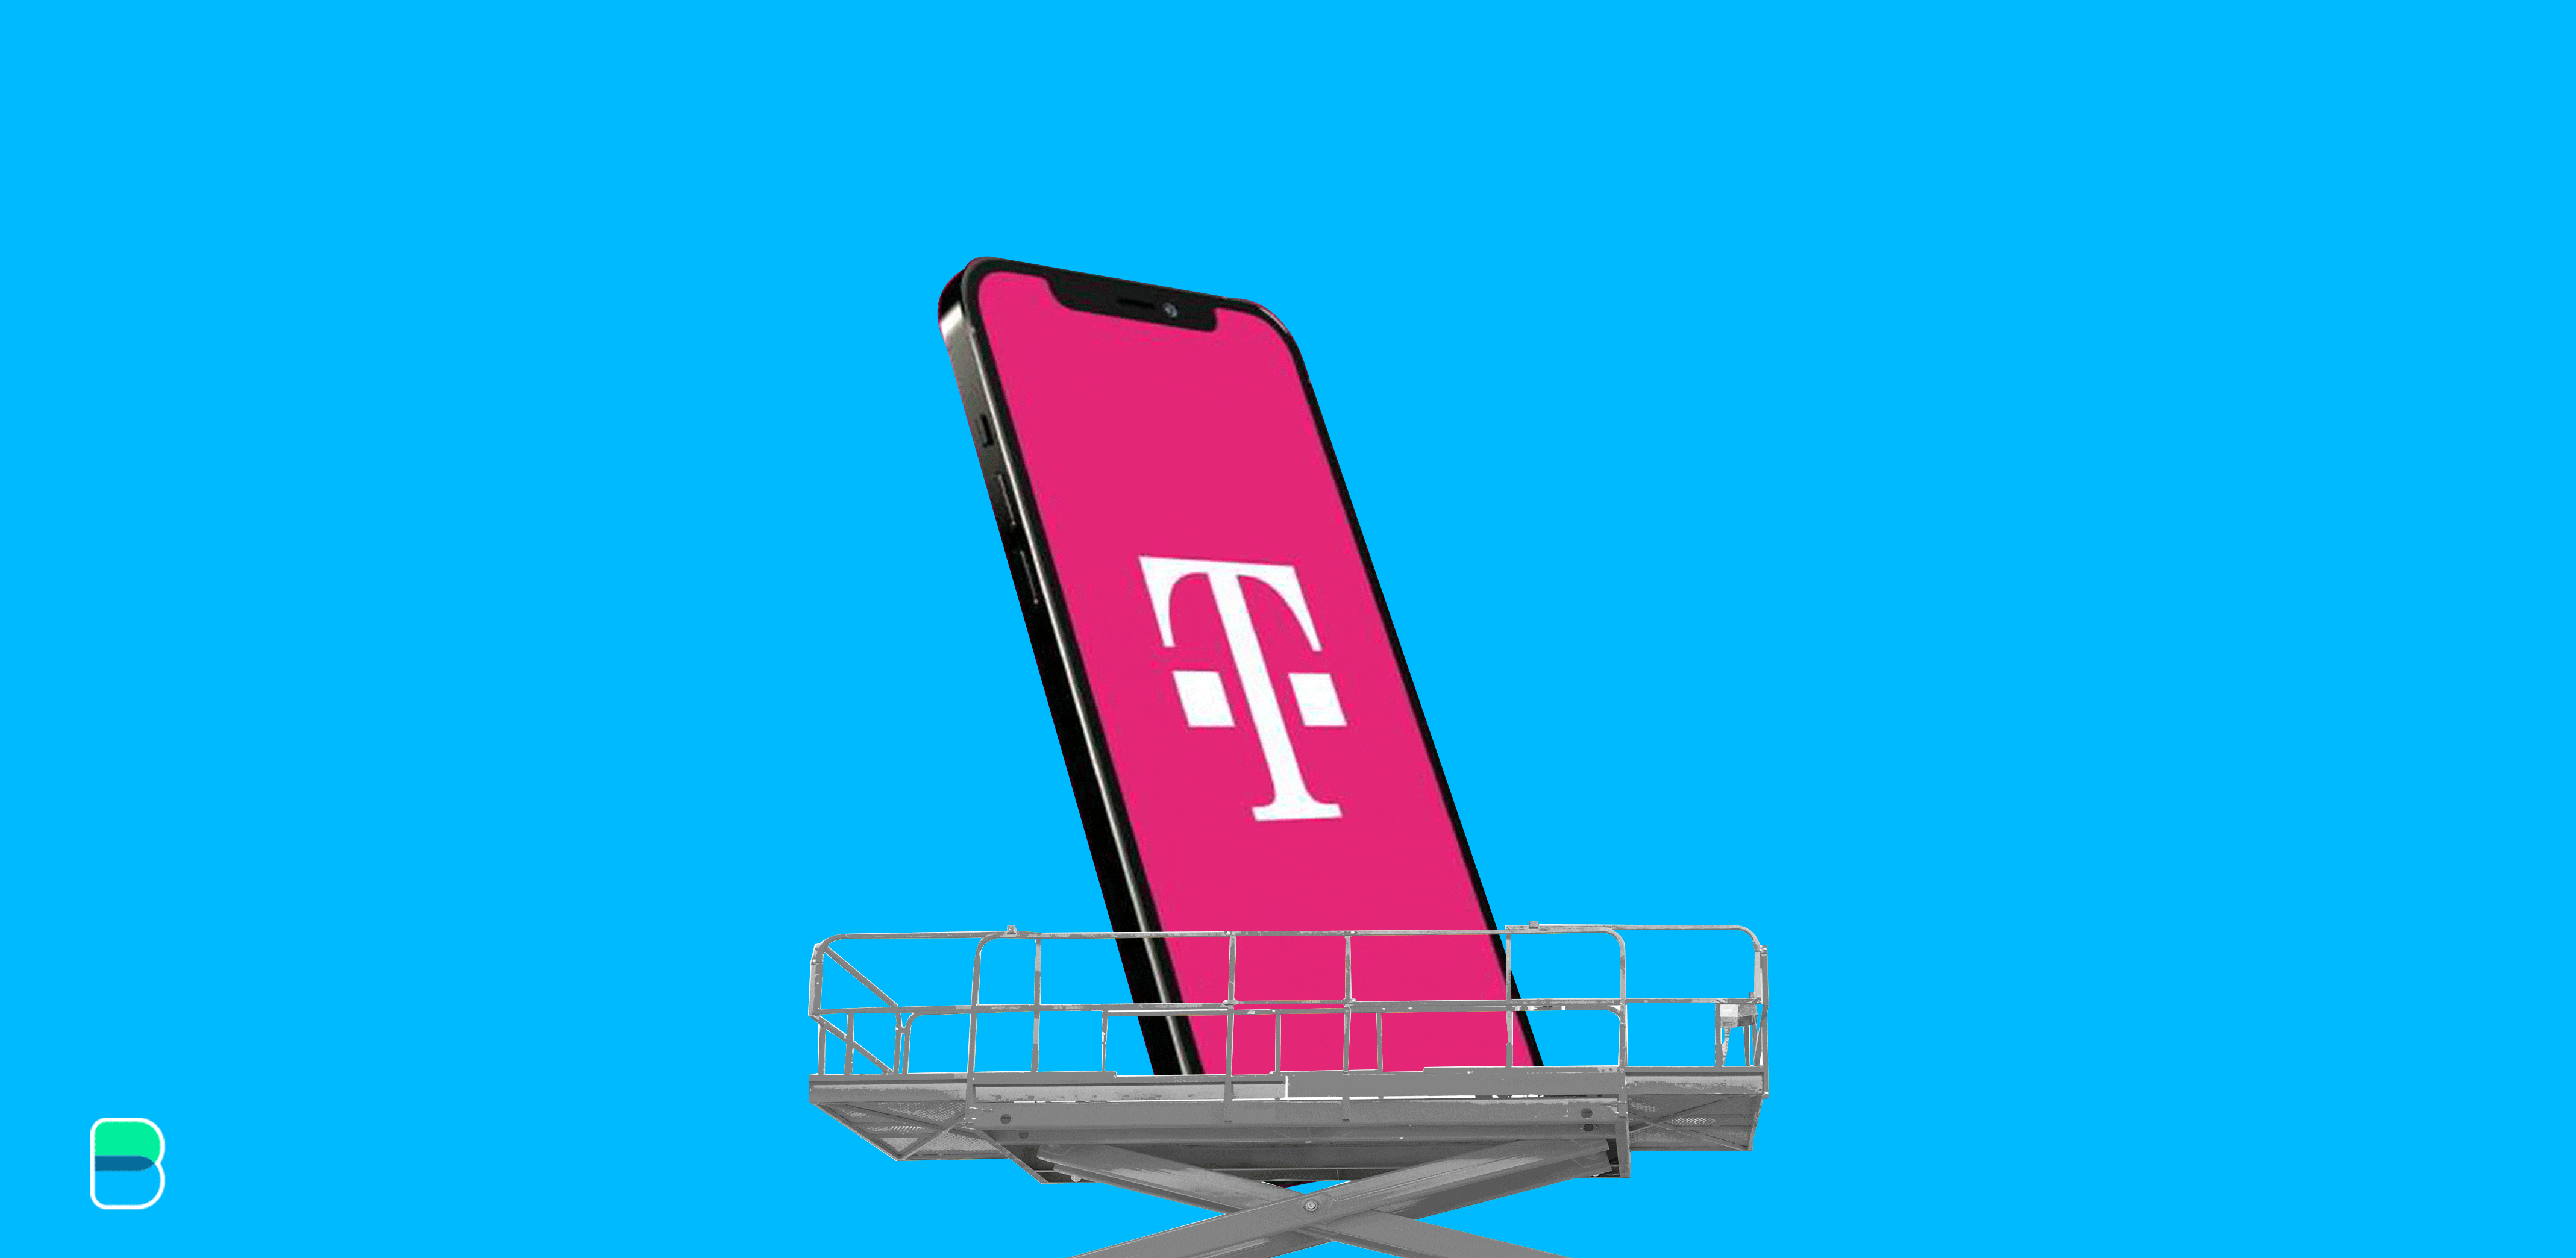 Deutsche Telekom and SoftBank walk into a room with T-Mobile&hellip;